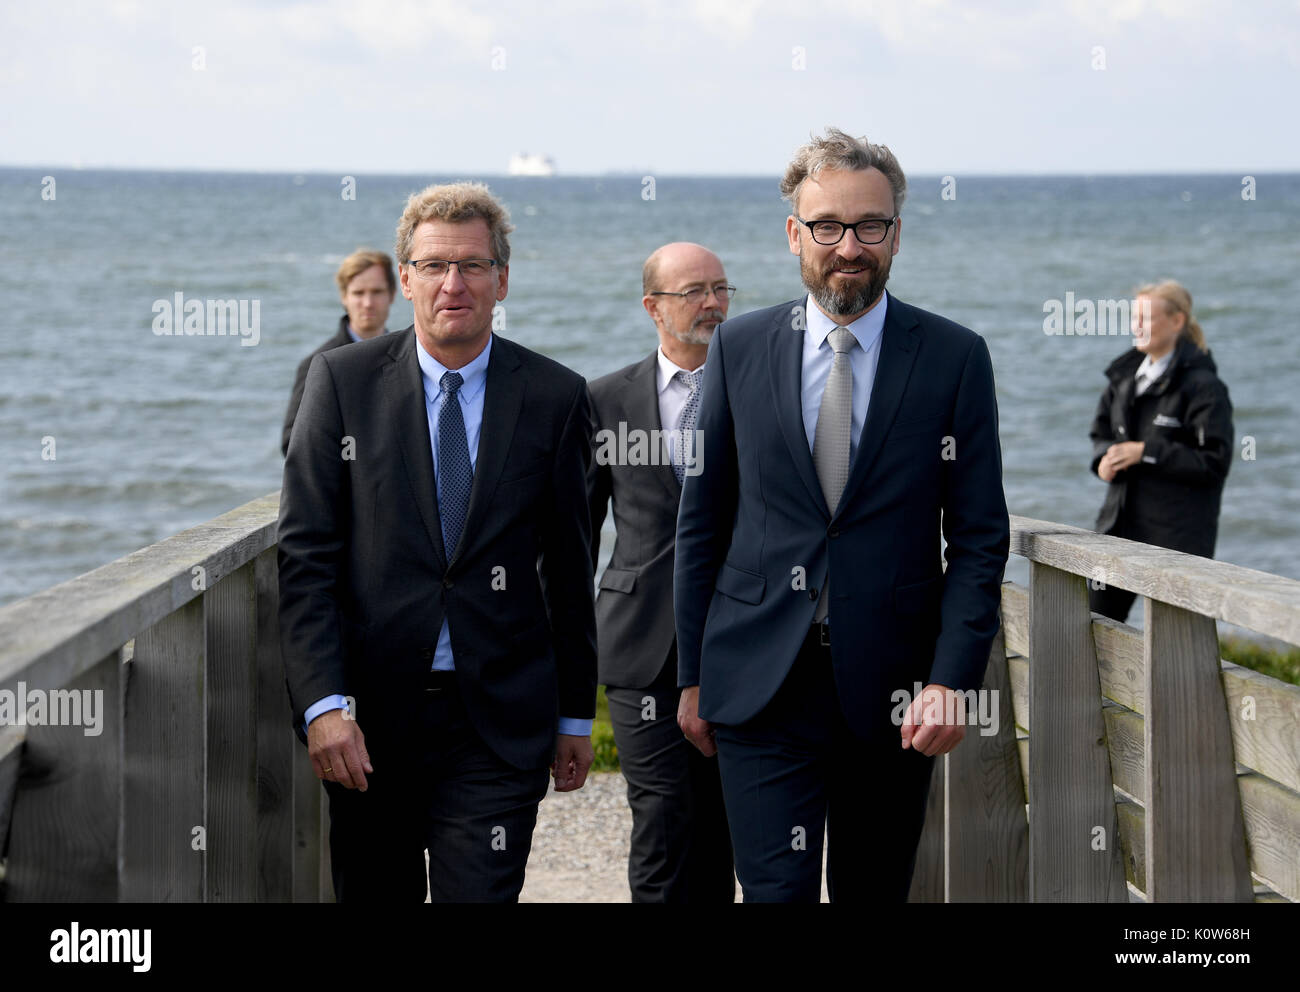 Denmark. 25th August, 2017. The Economy Minister of the state of Schleswig-Holstein, Bernd Buchholz (L), standing with his Danish counterpart Ole Birk Olesen (R) on a viewing platform of the proposed tunnel in Rødbyhavn, Denmark, 25 August 2017. The topic of the talks was the future Fehmarnbelt tunnel. Photo: Carsten Rehder/dpa/Alamy Live News Stock Photo